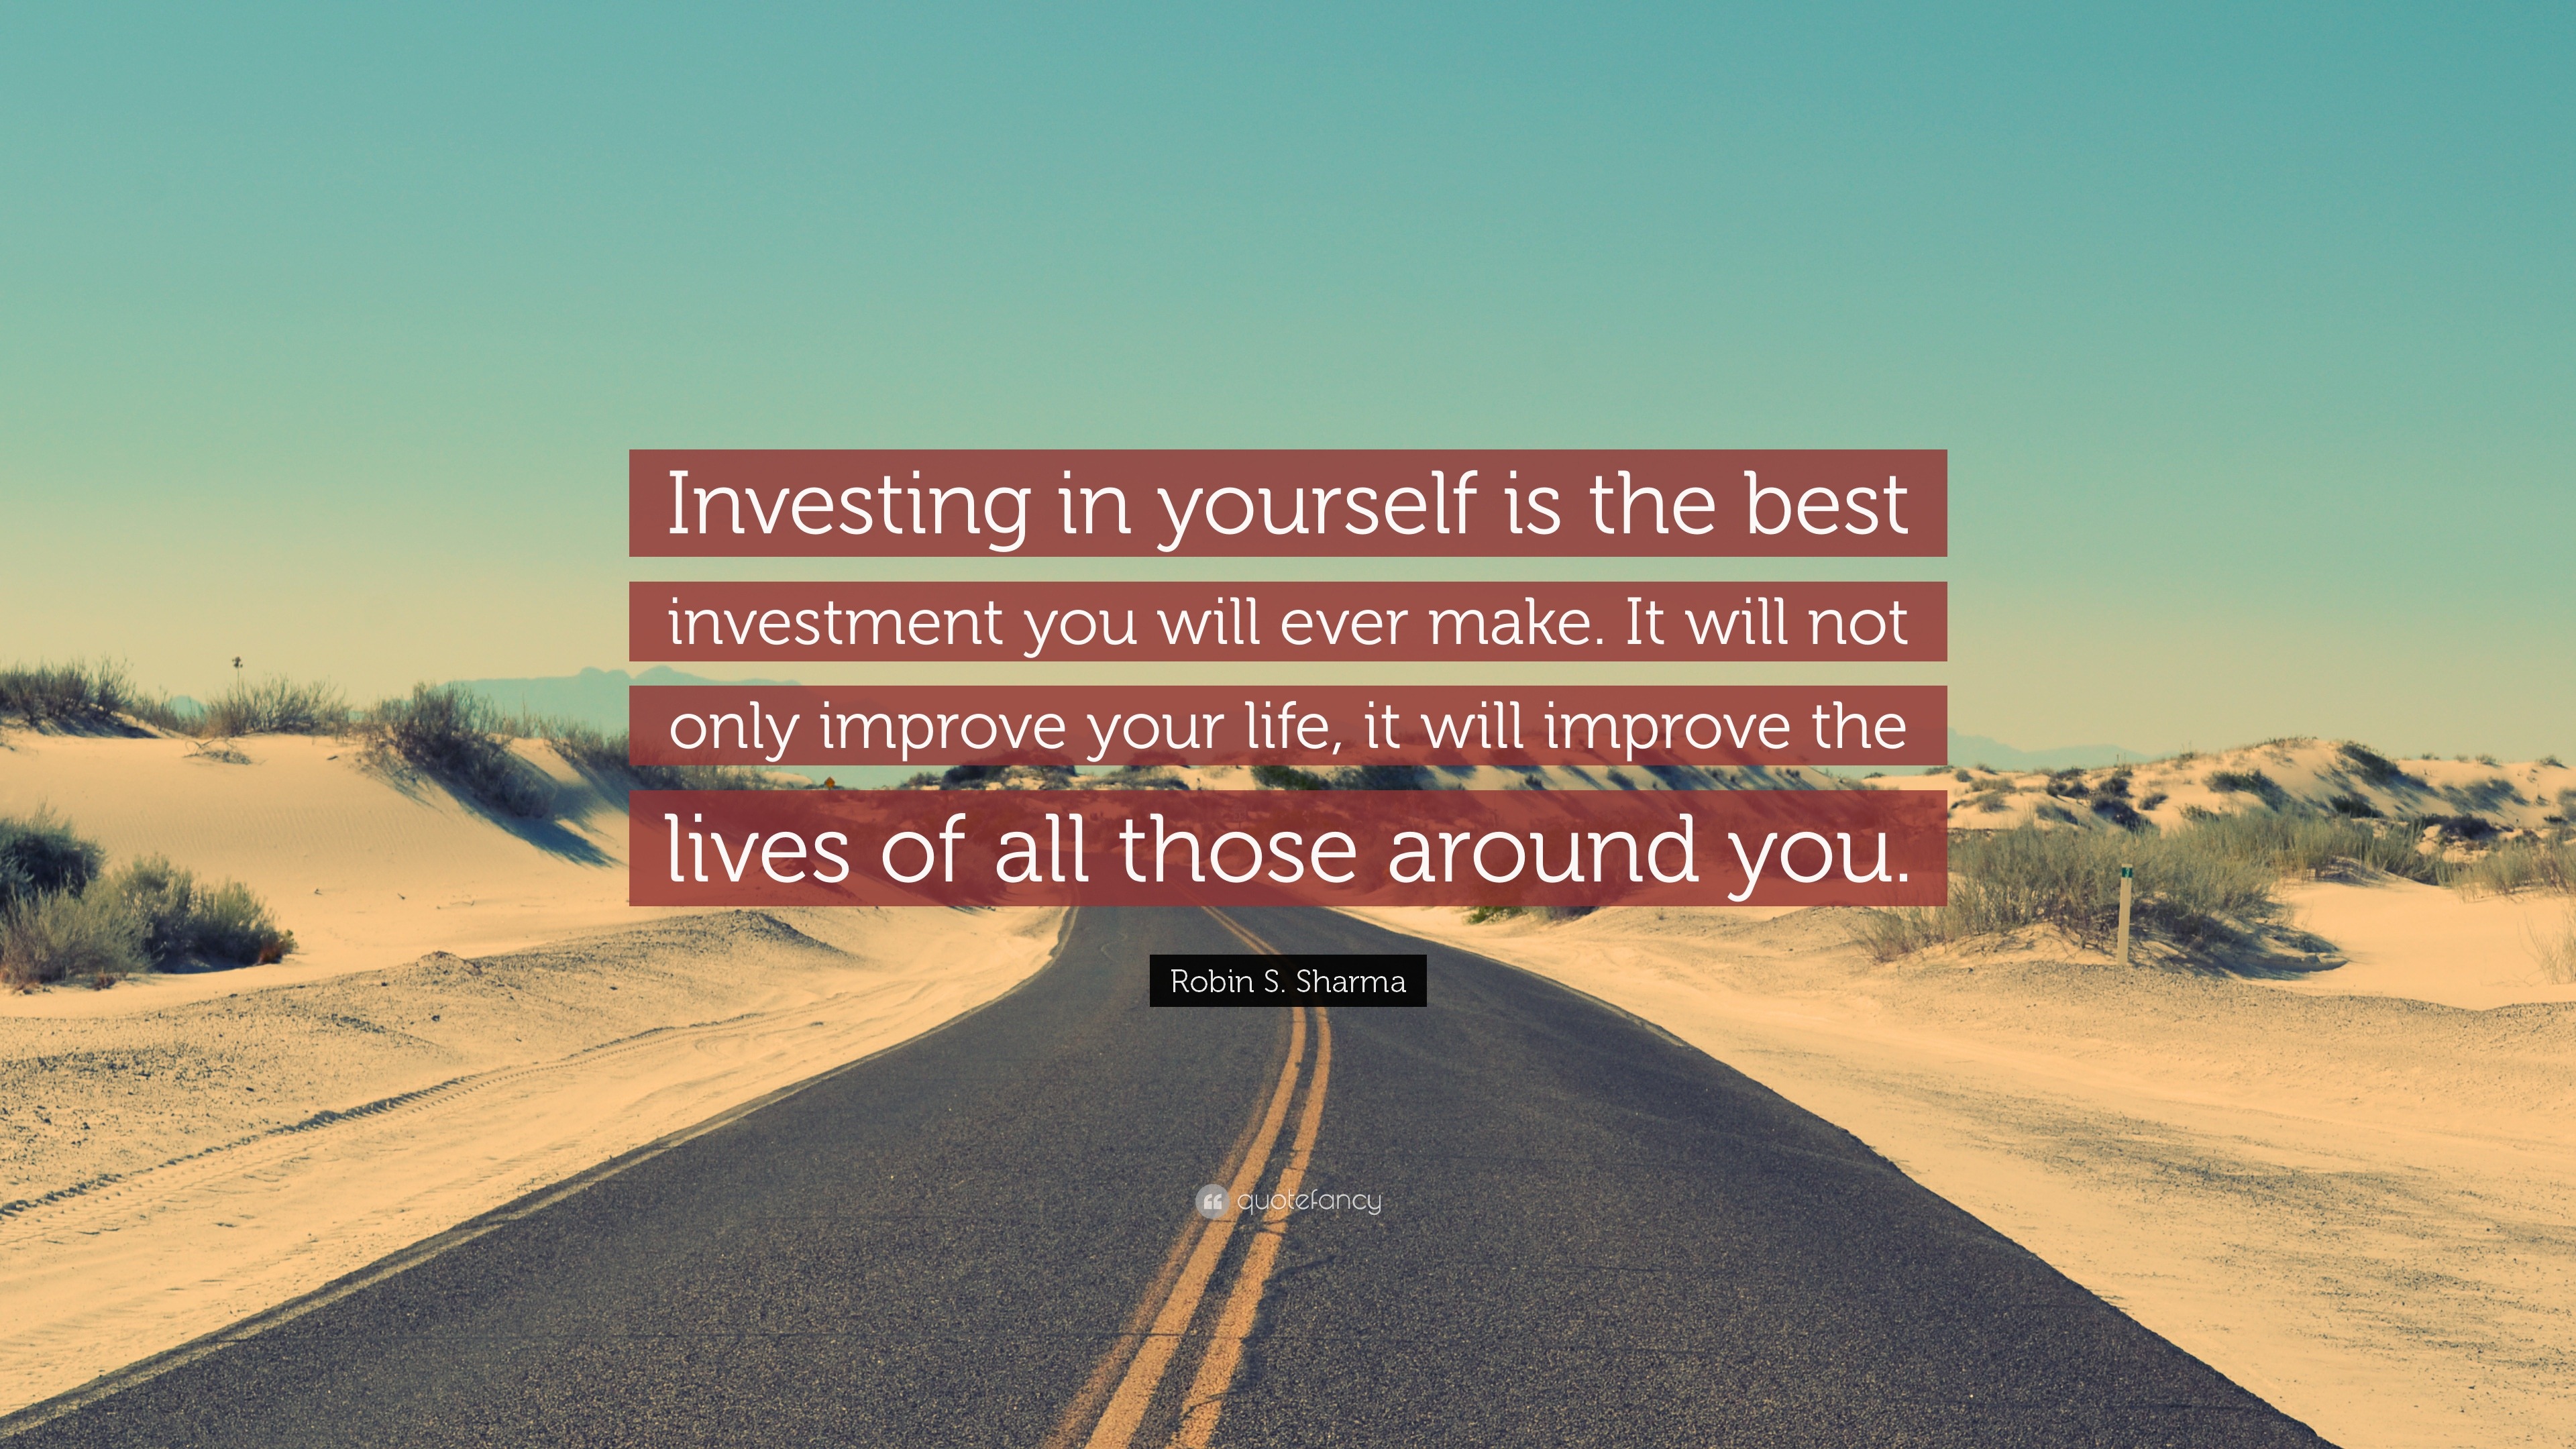 Robin S. Sharma Quote: “Investing in yourself is the best investment ...